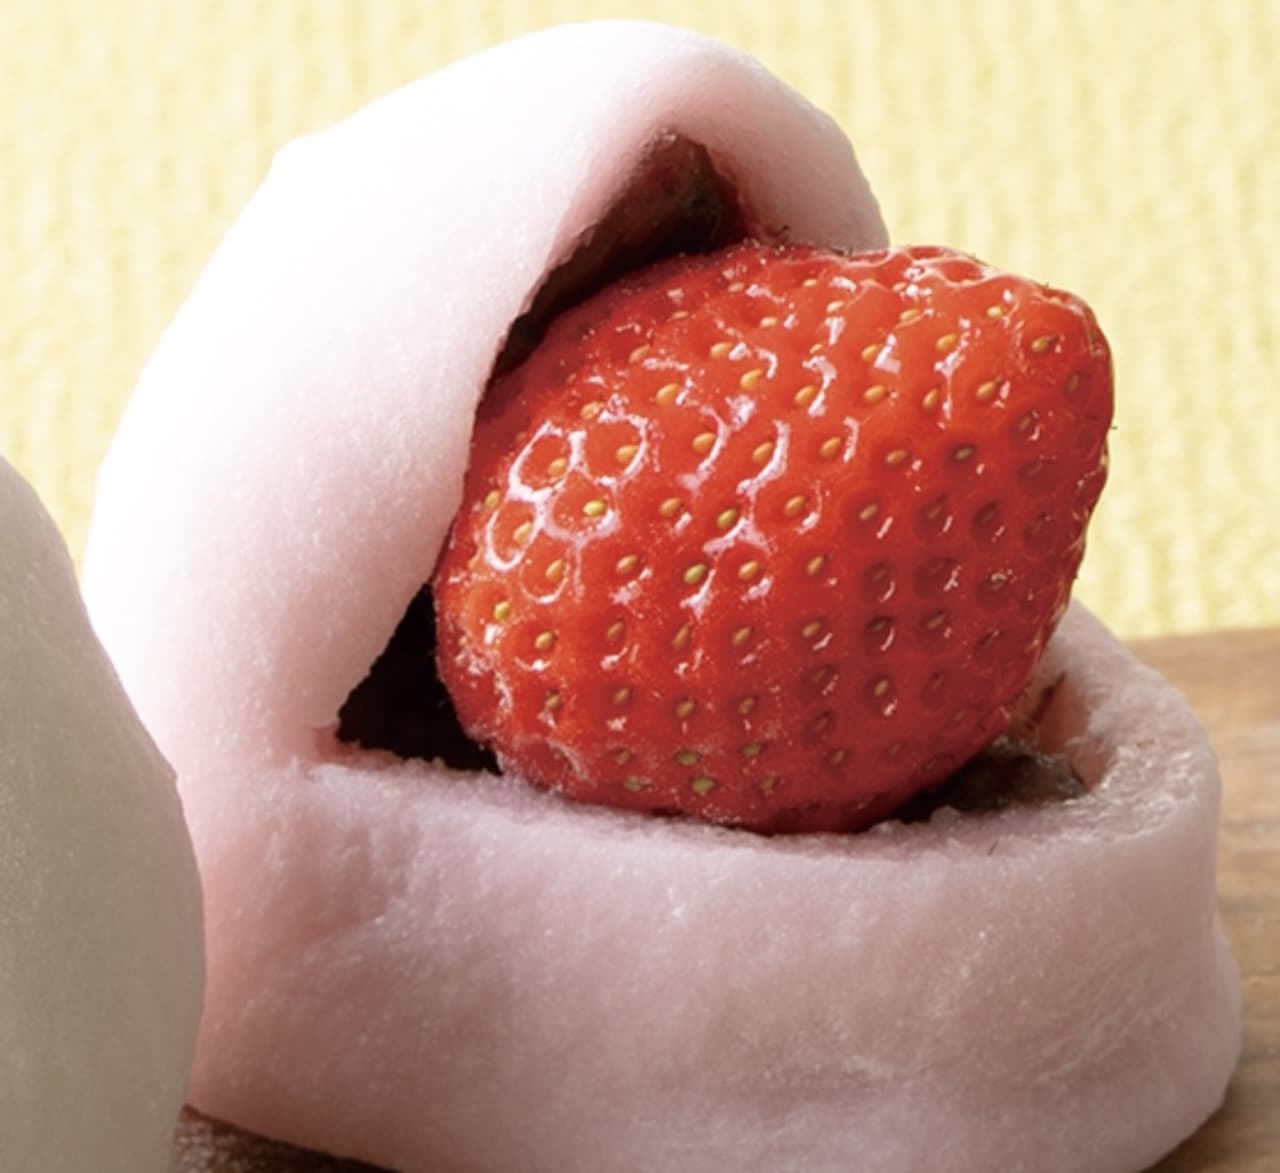 Chateraise "Tokusen Tochiotome Big Strawberry Daifuku with Grained Bean Paste